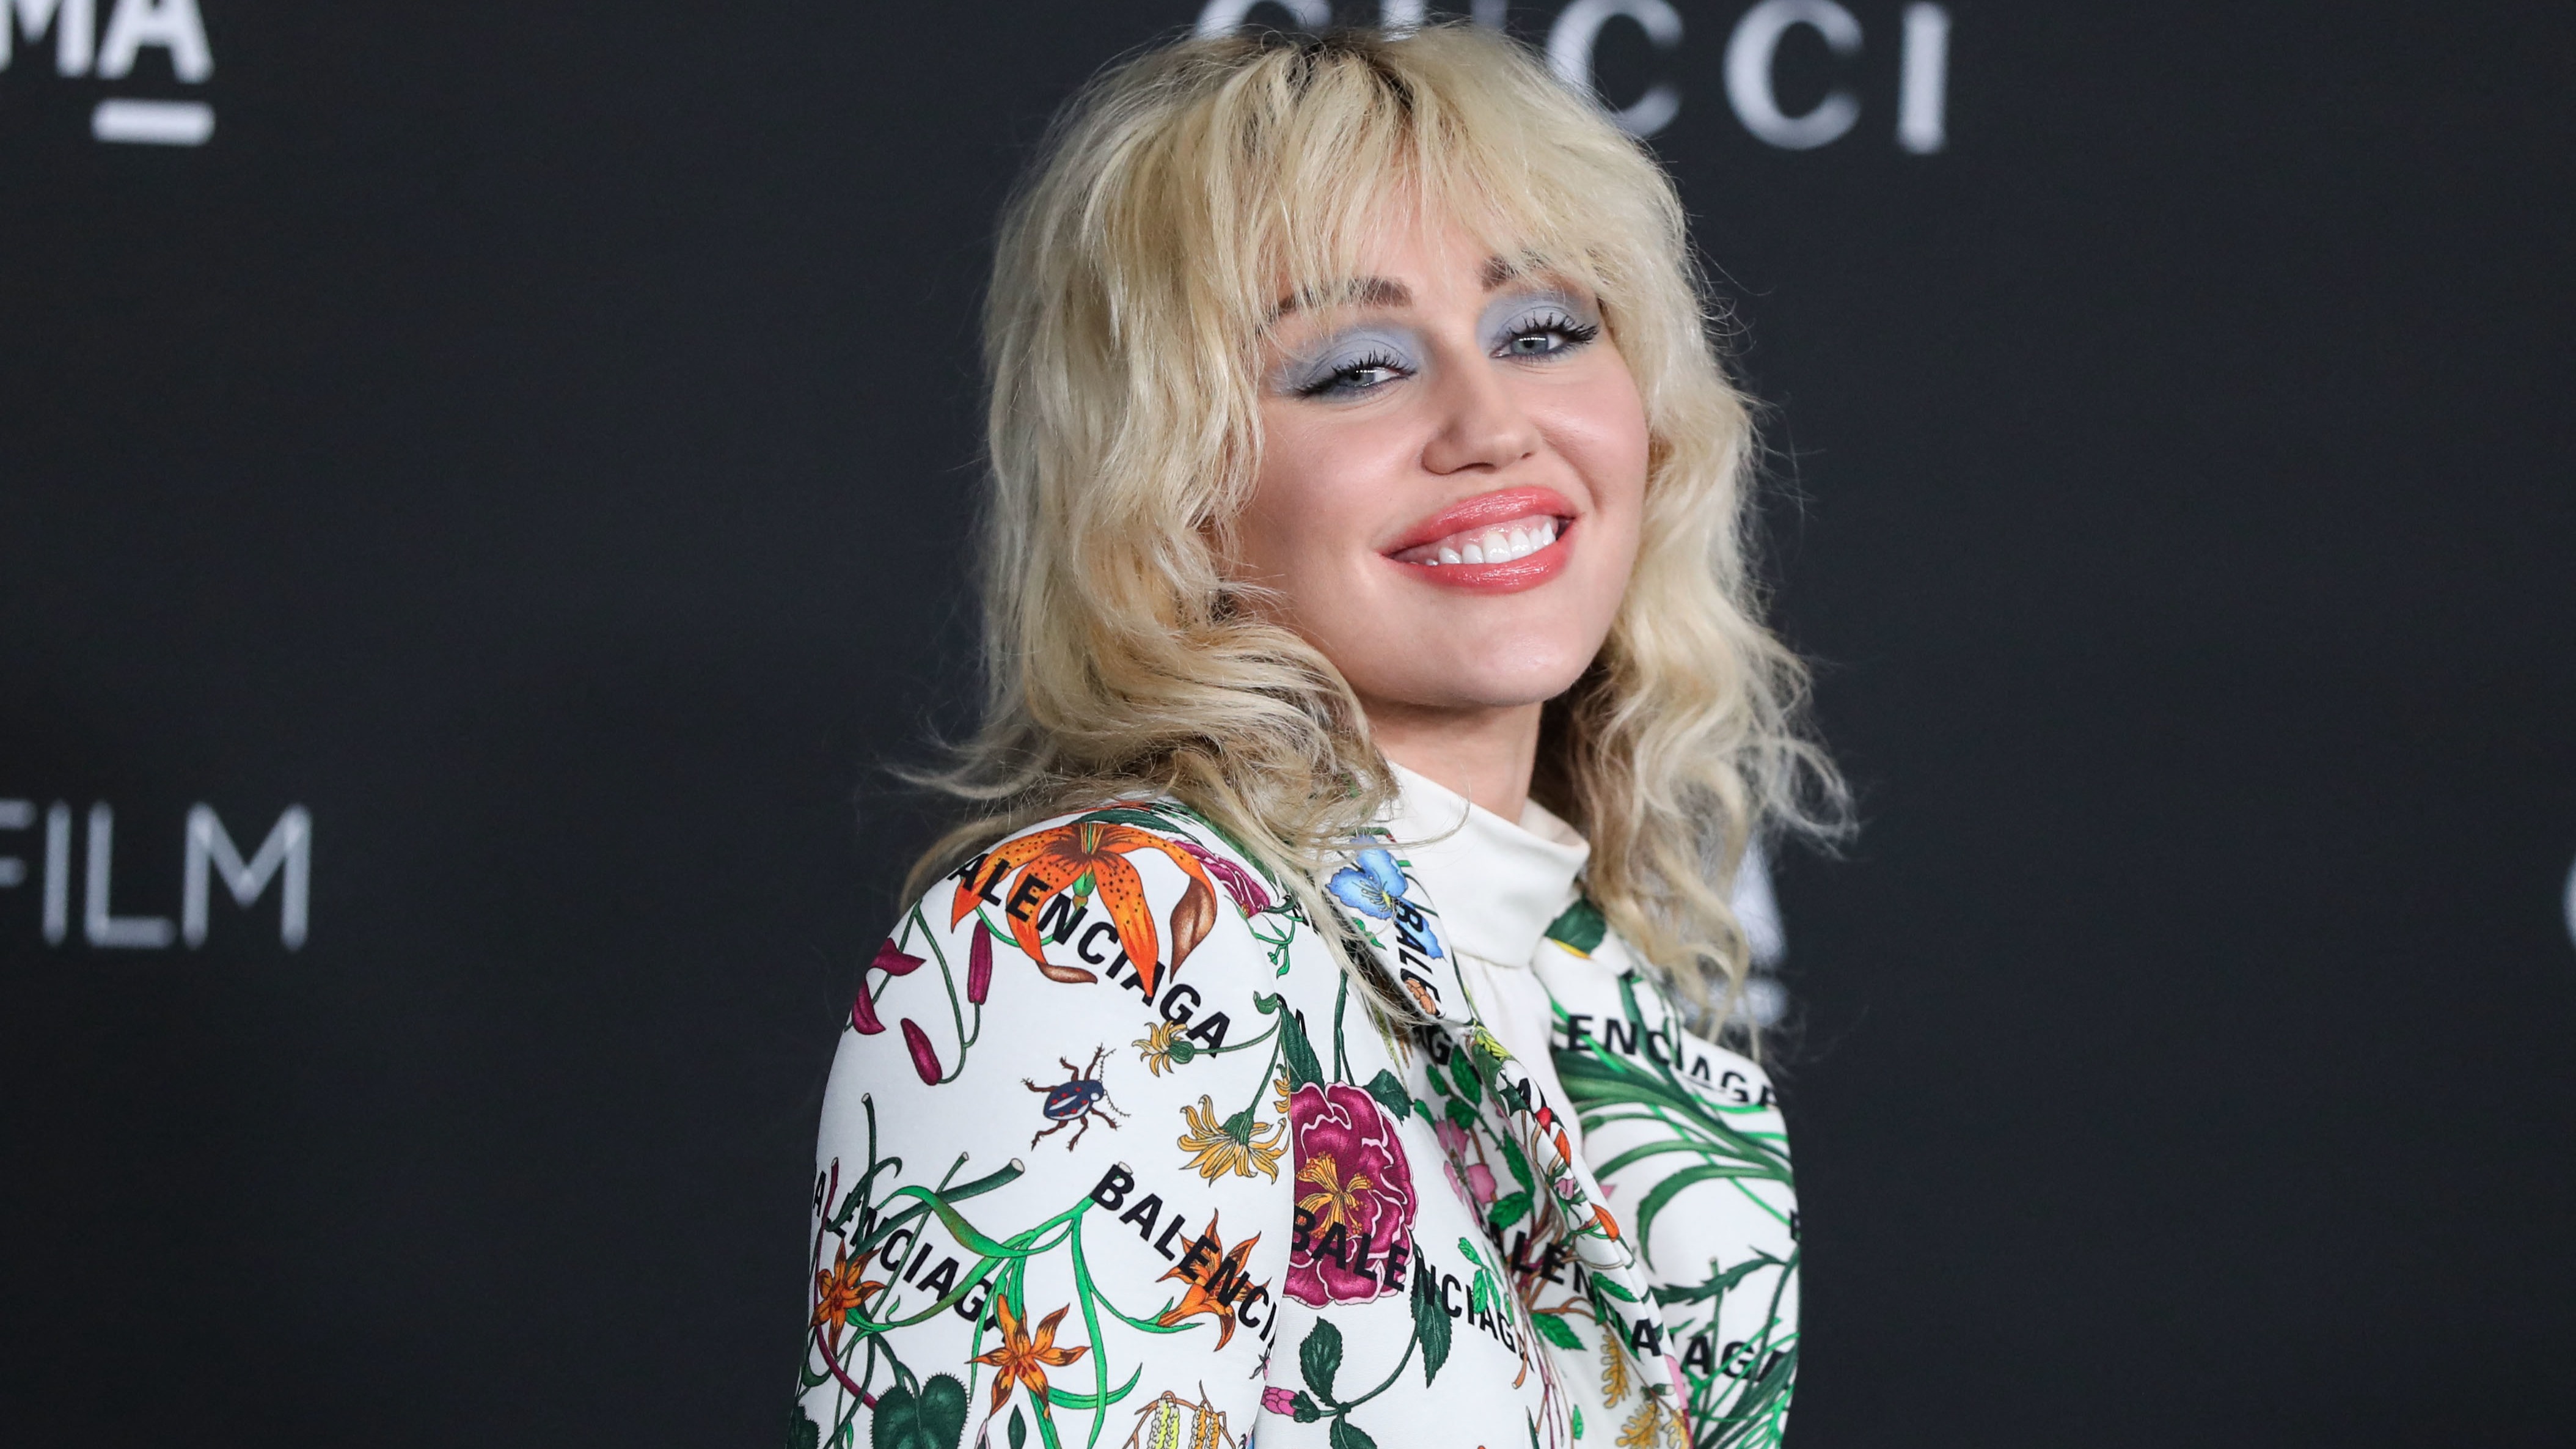 Popstar Miley Cyrus shares promotion of her new single 'Flowers' on ...